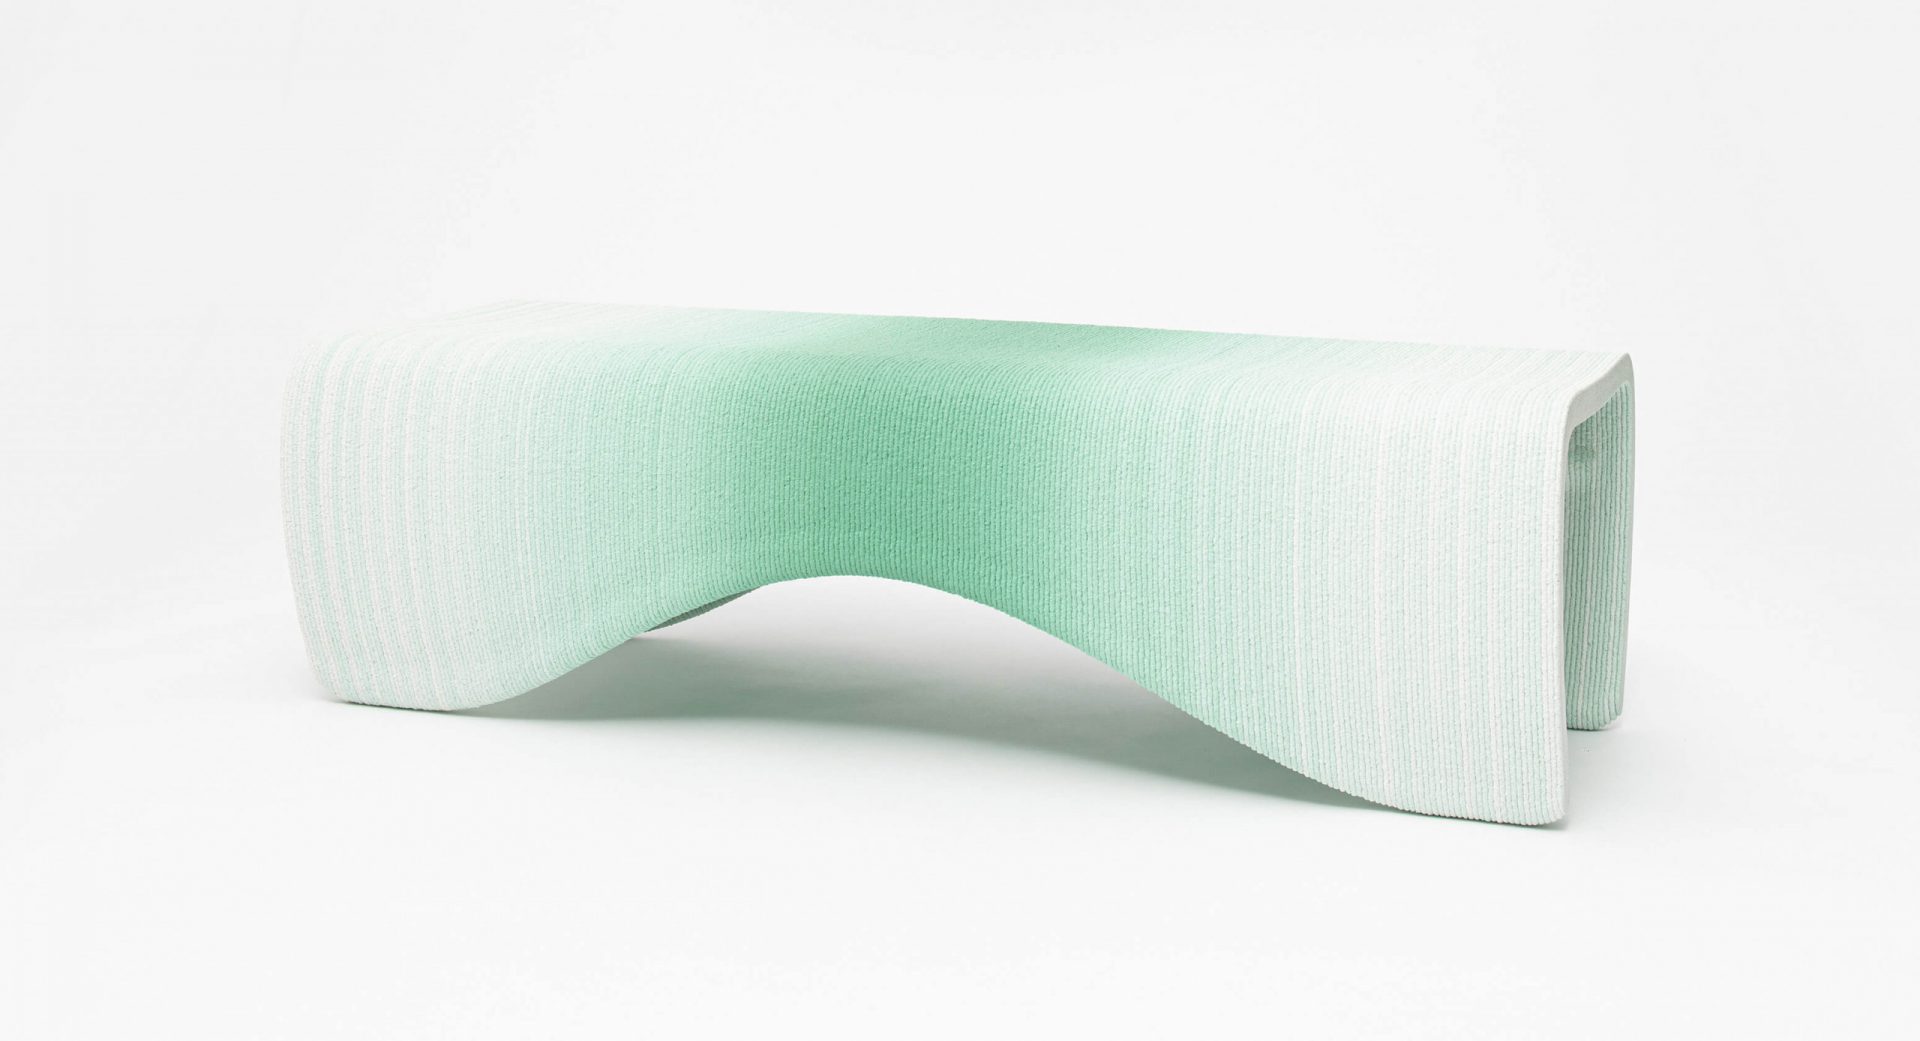 Gradient furniture - bench / Discover the 3D-printed gradient furniture collection by Philipp Aduatz